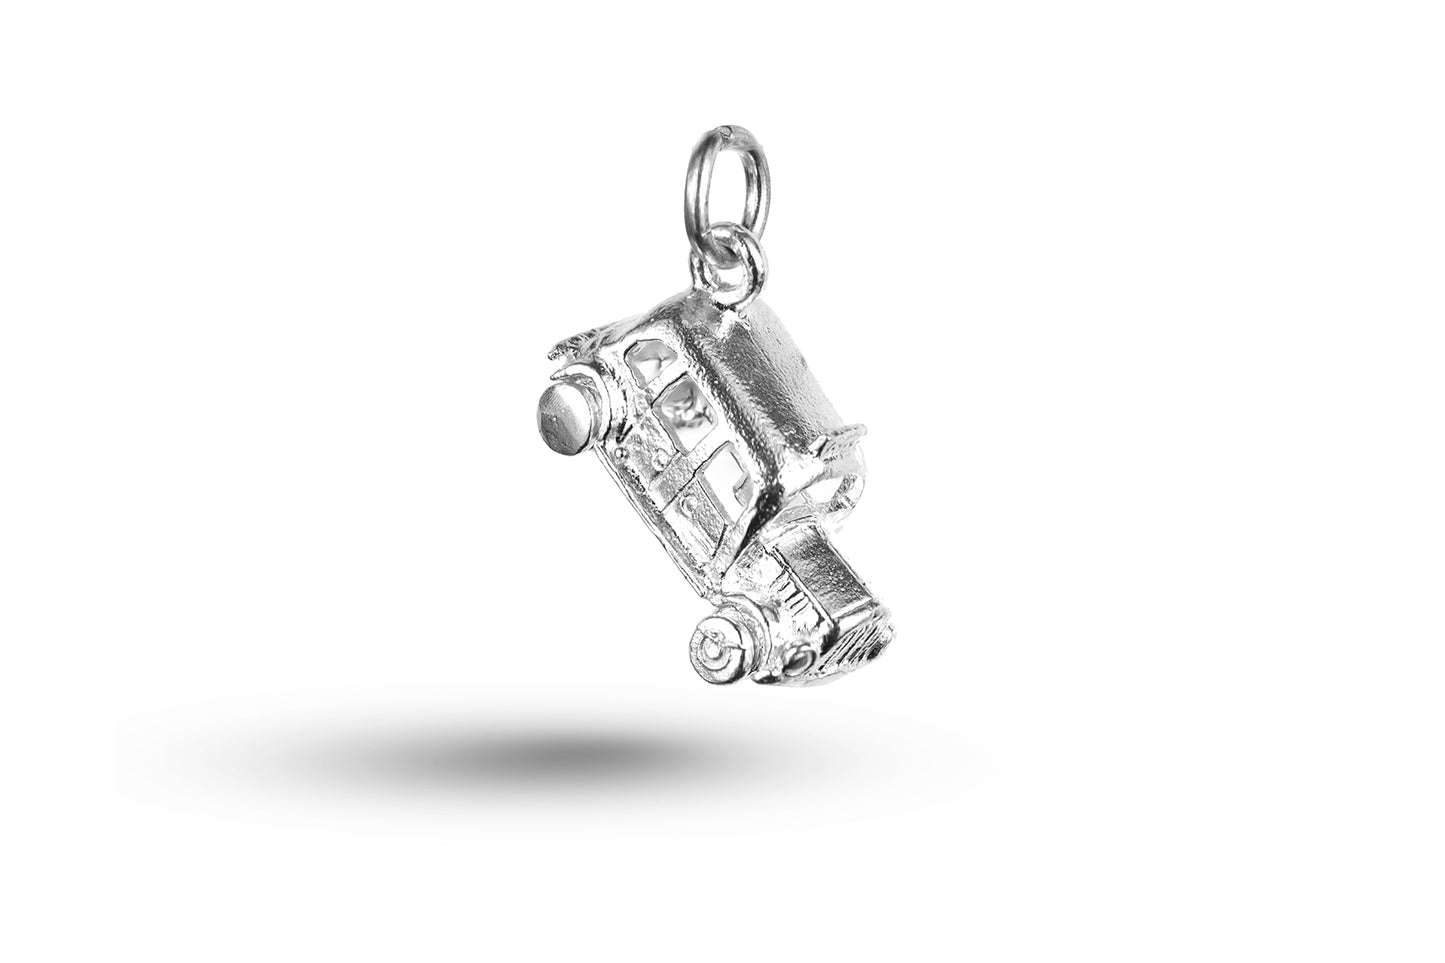 White gold London Taxi Cab charm.